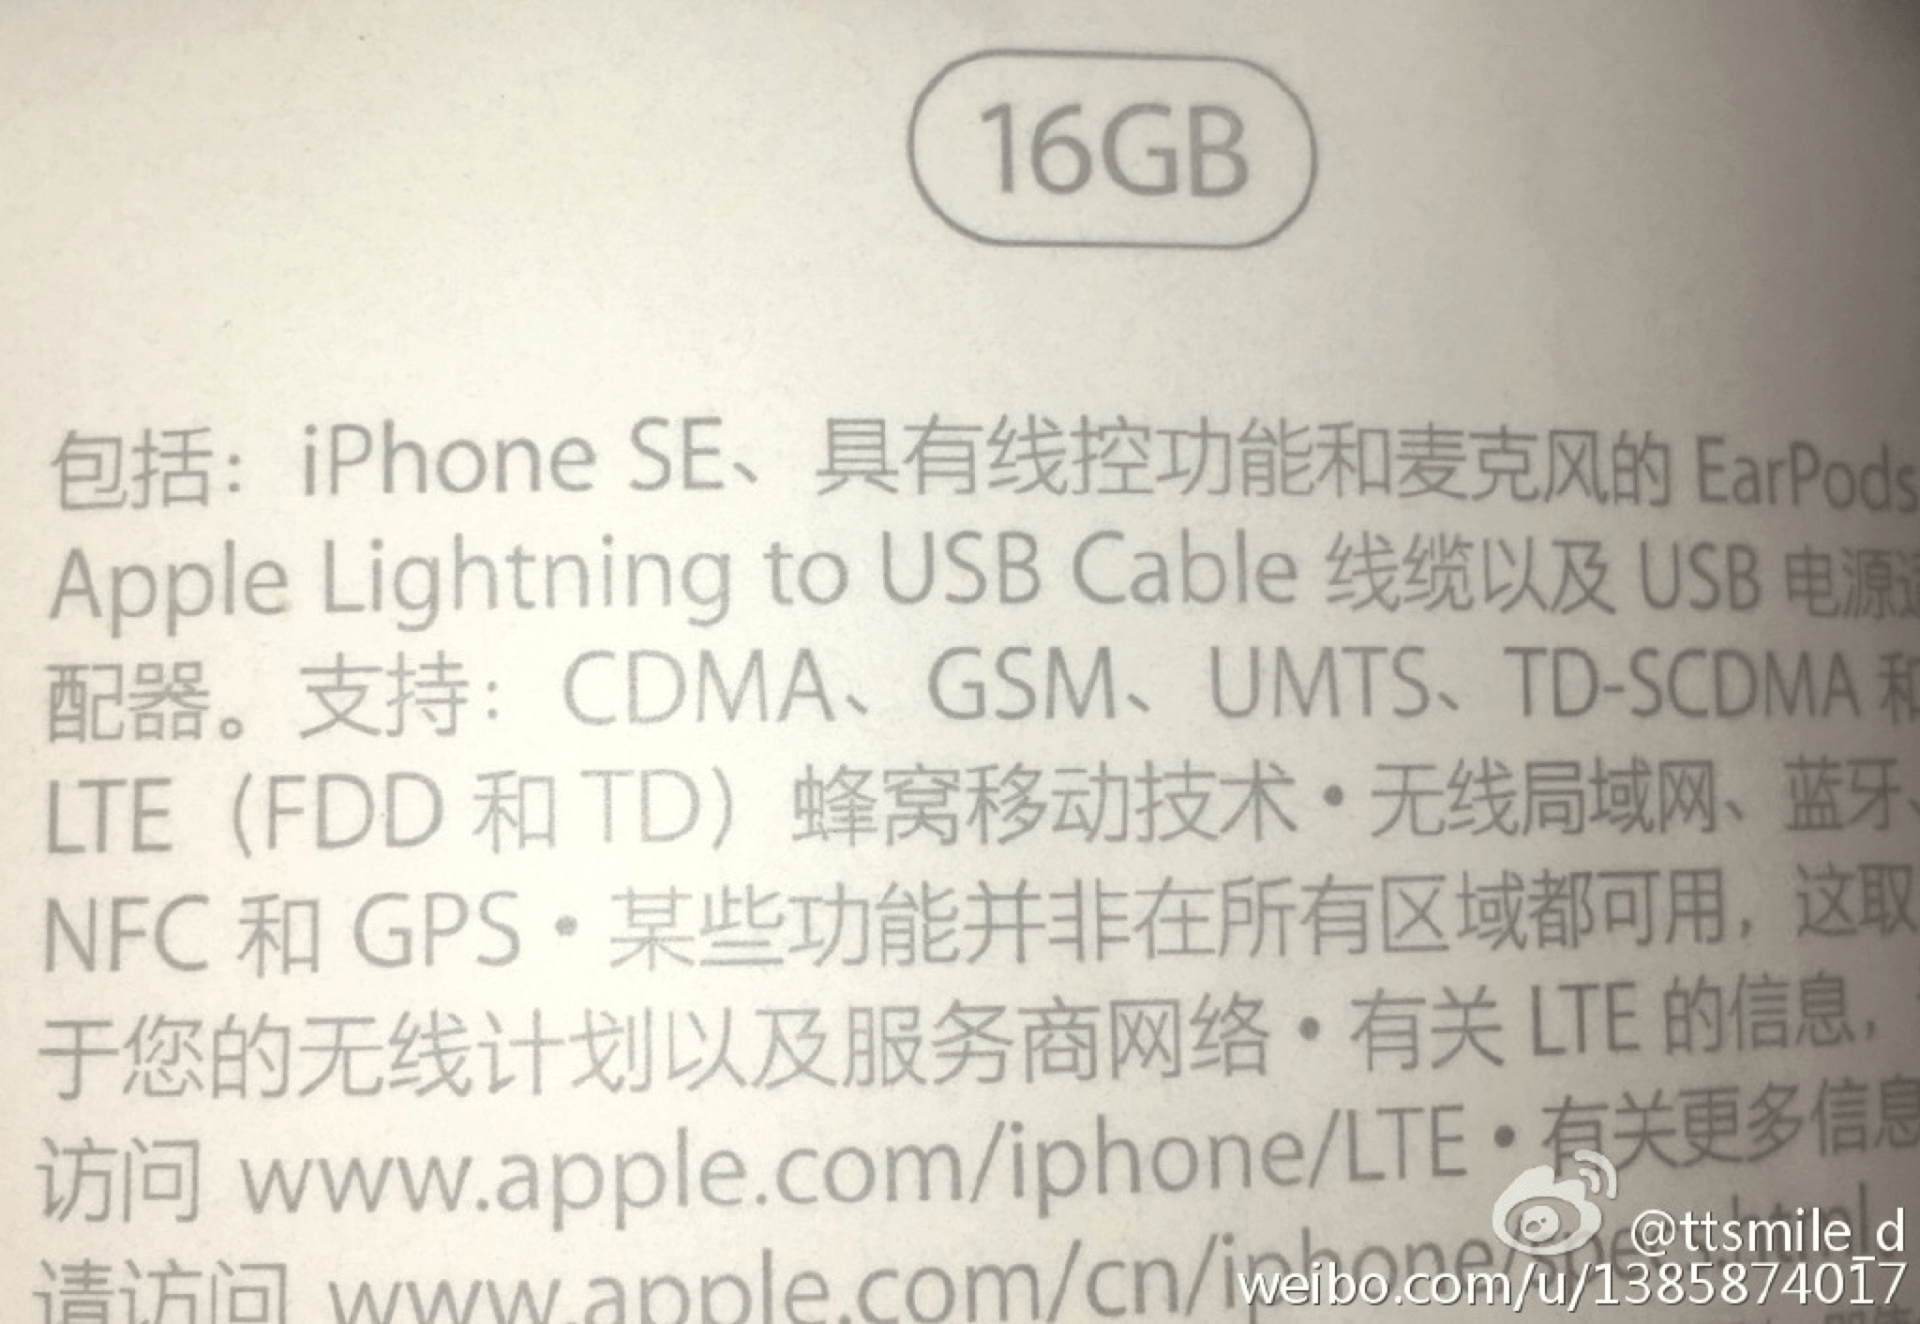 Alleged “iPhone SE” packaging confirms some rumors about the device [atualizado]